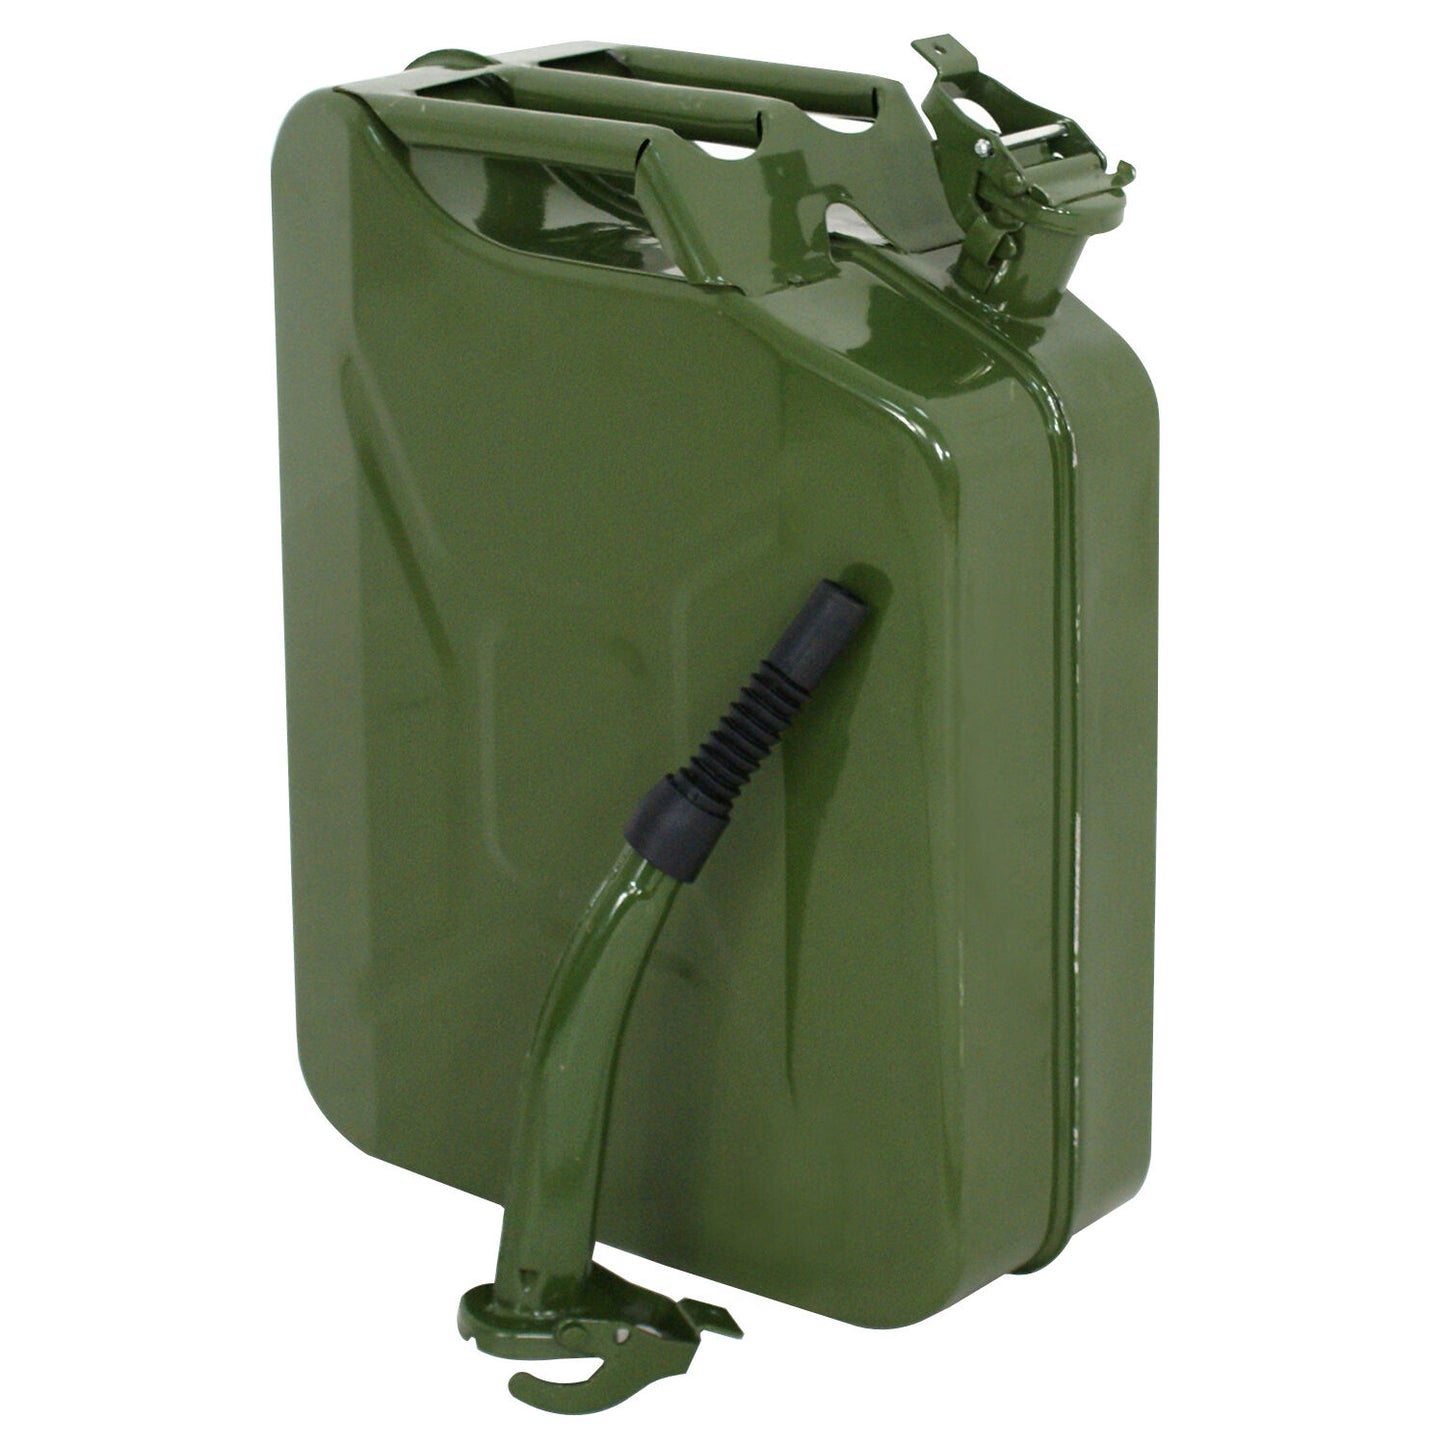 3X Jerry Can 5 Gallon 20L Metal Steel Tank Army Backup Gas Gasoline Emergency